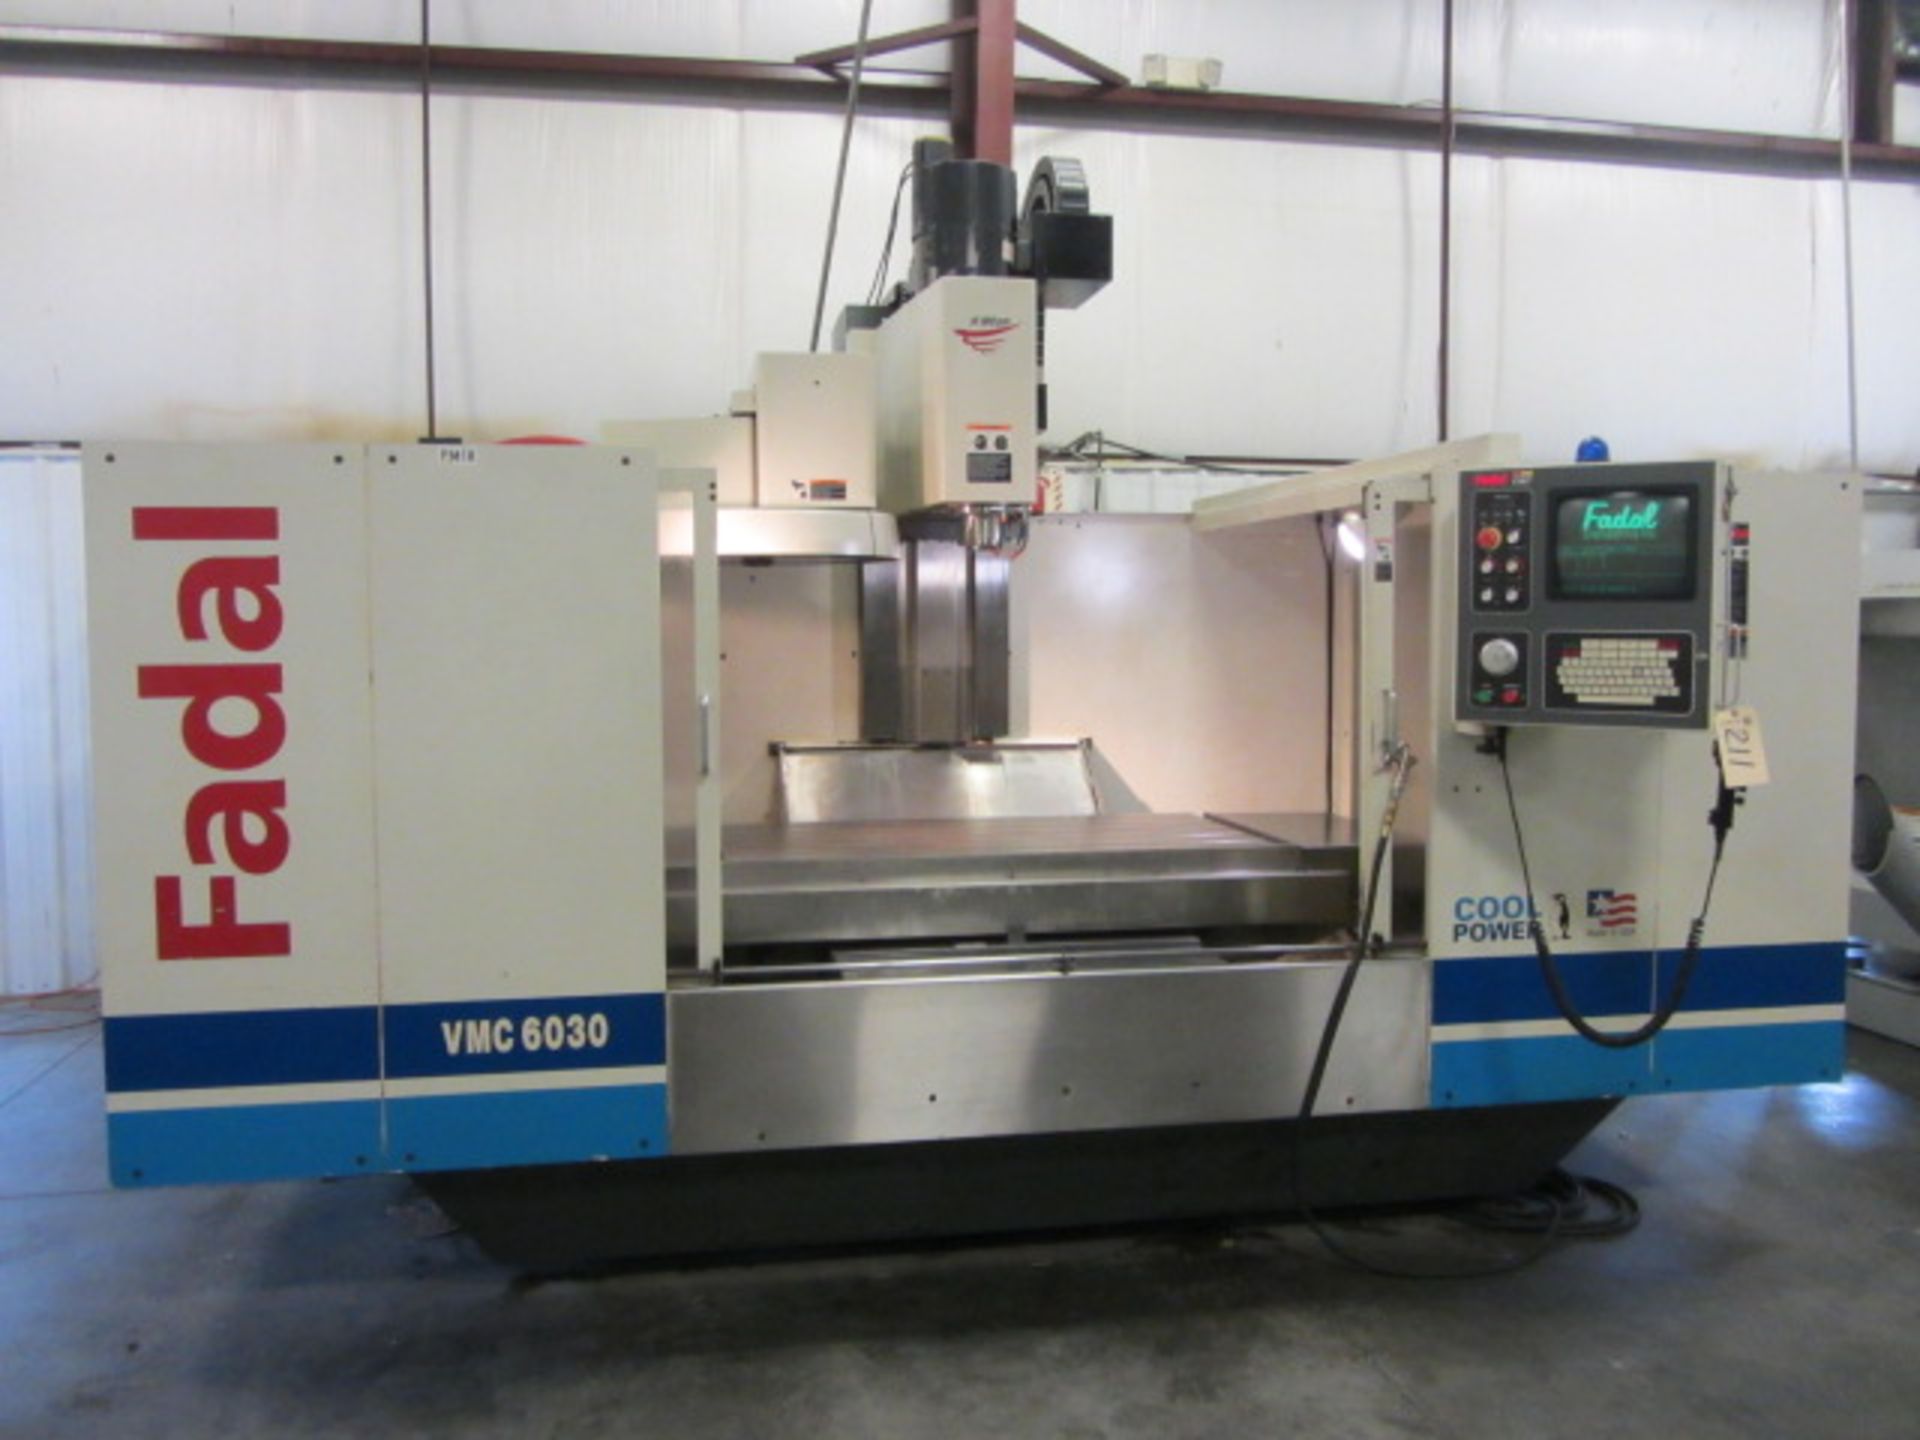 Fadal 6030 CNC Vertical Machining Center with 30'' x 57'' Table, #40 Taper Spindle Speeds to 10,